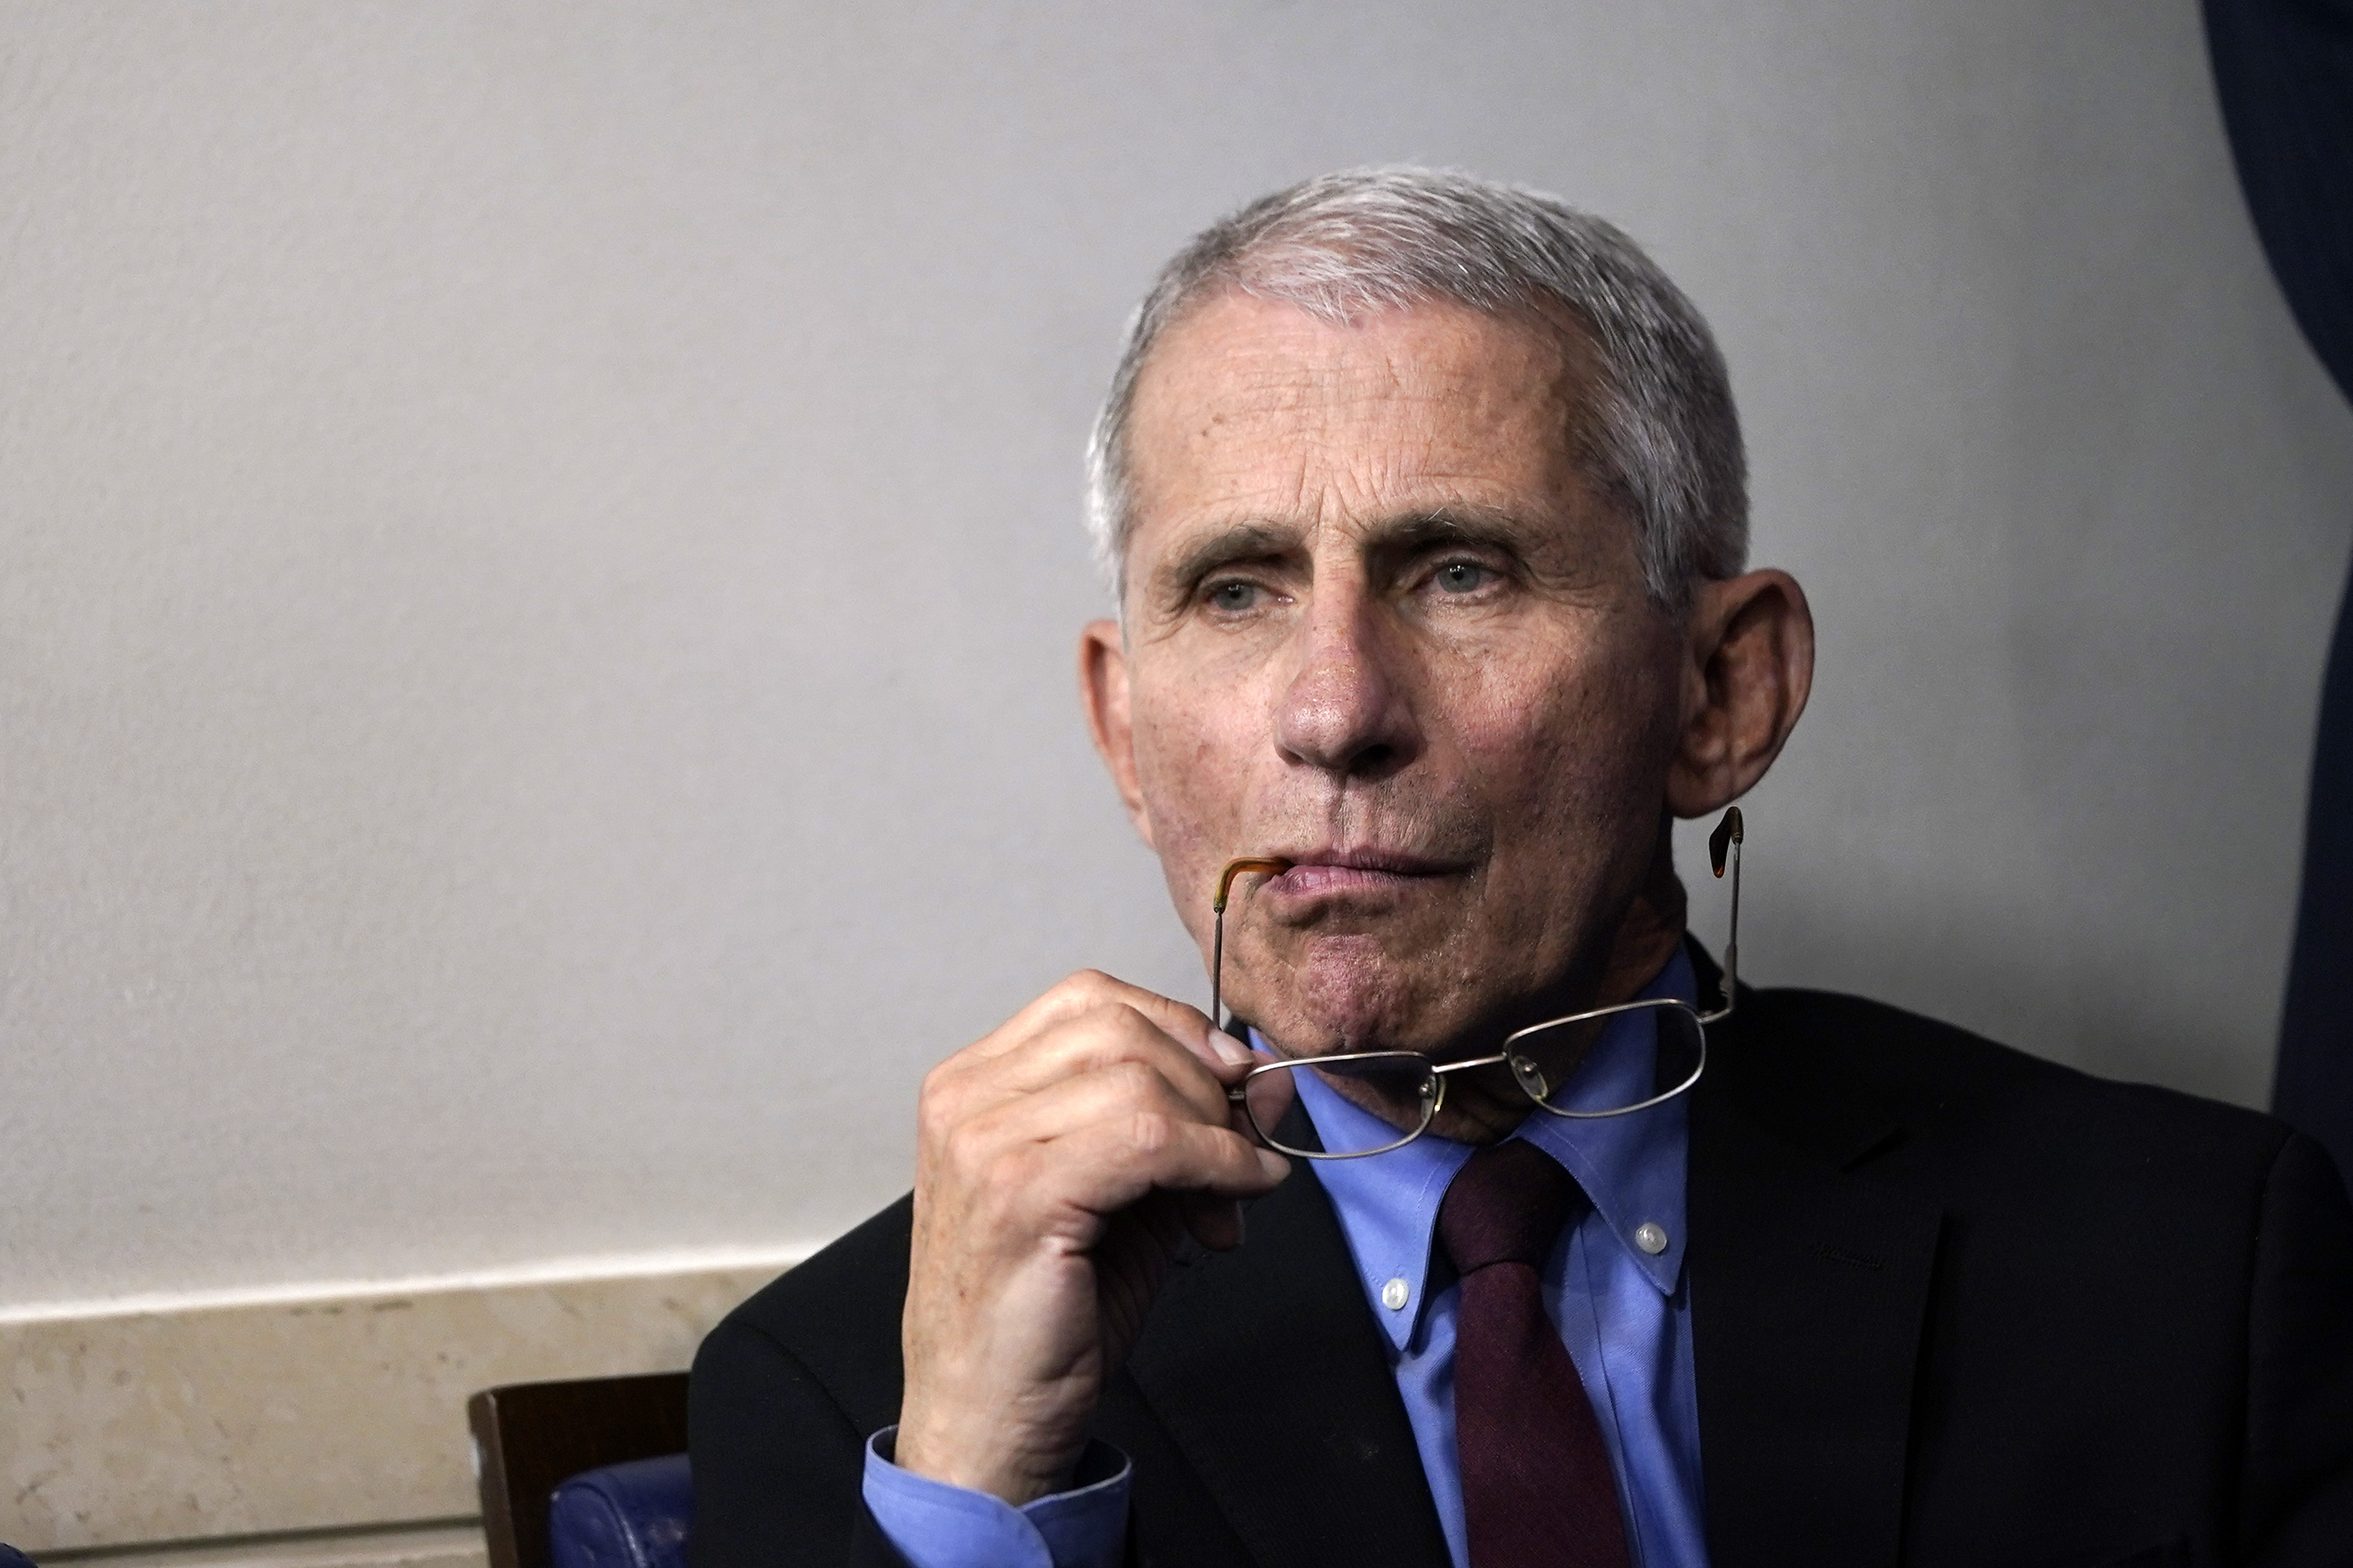 Dr. Anthony Fauci in Washington, D.C. (Photo by Drew Angerer/Getty Images)